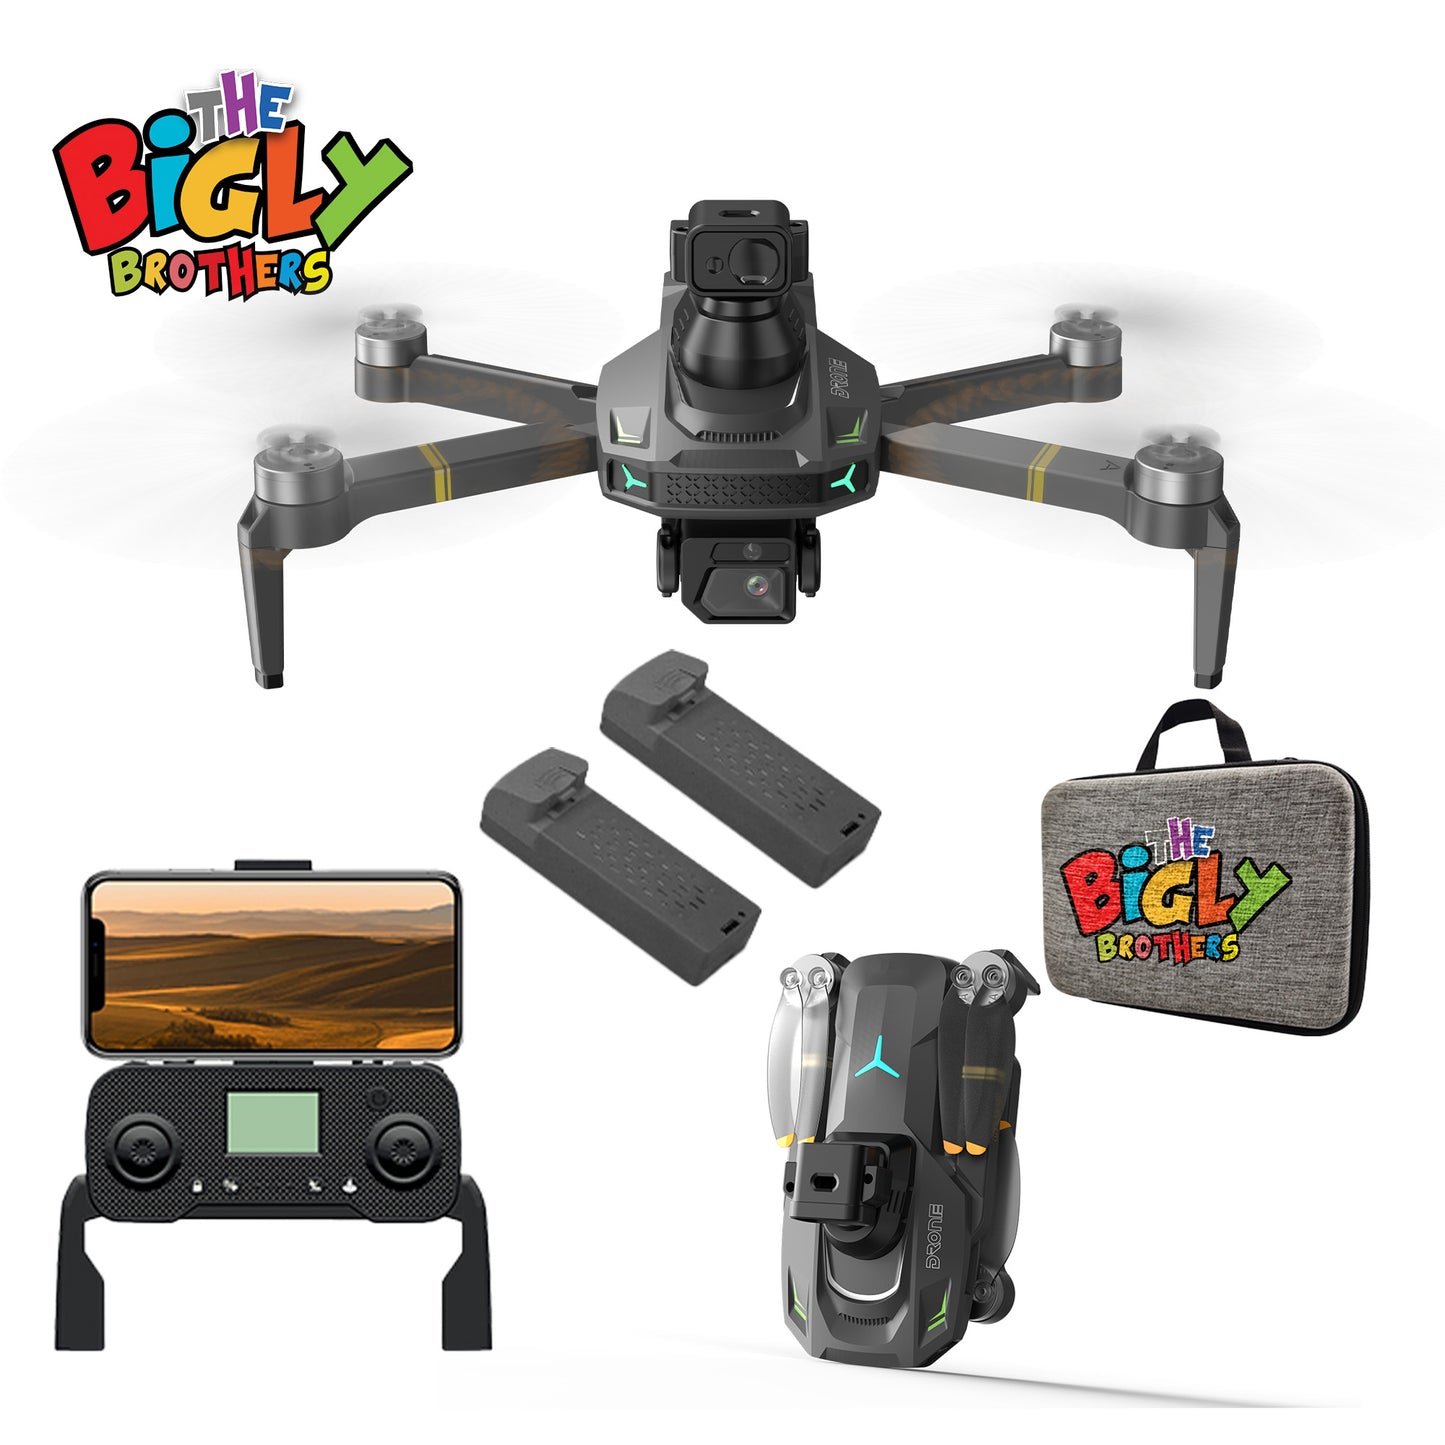 The Bigly Brothers E59 Mark III Delta Black Superior Edition, 60-Min Flight Time, Obstacle Avoidance Drone with Camera, 720 Degrees of Obstacle Avoidance Drone with Carrying Case Below 249g